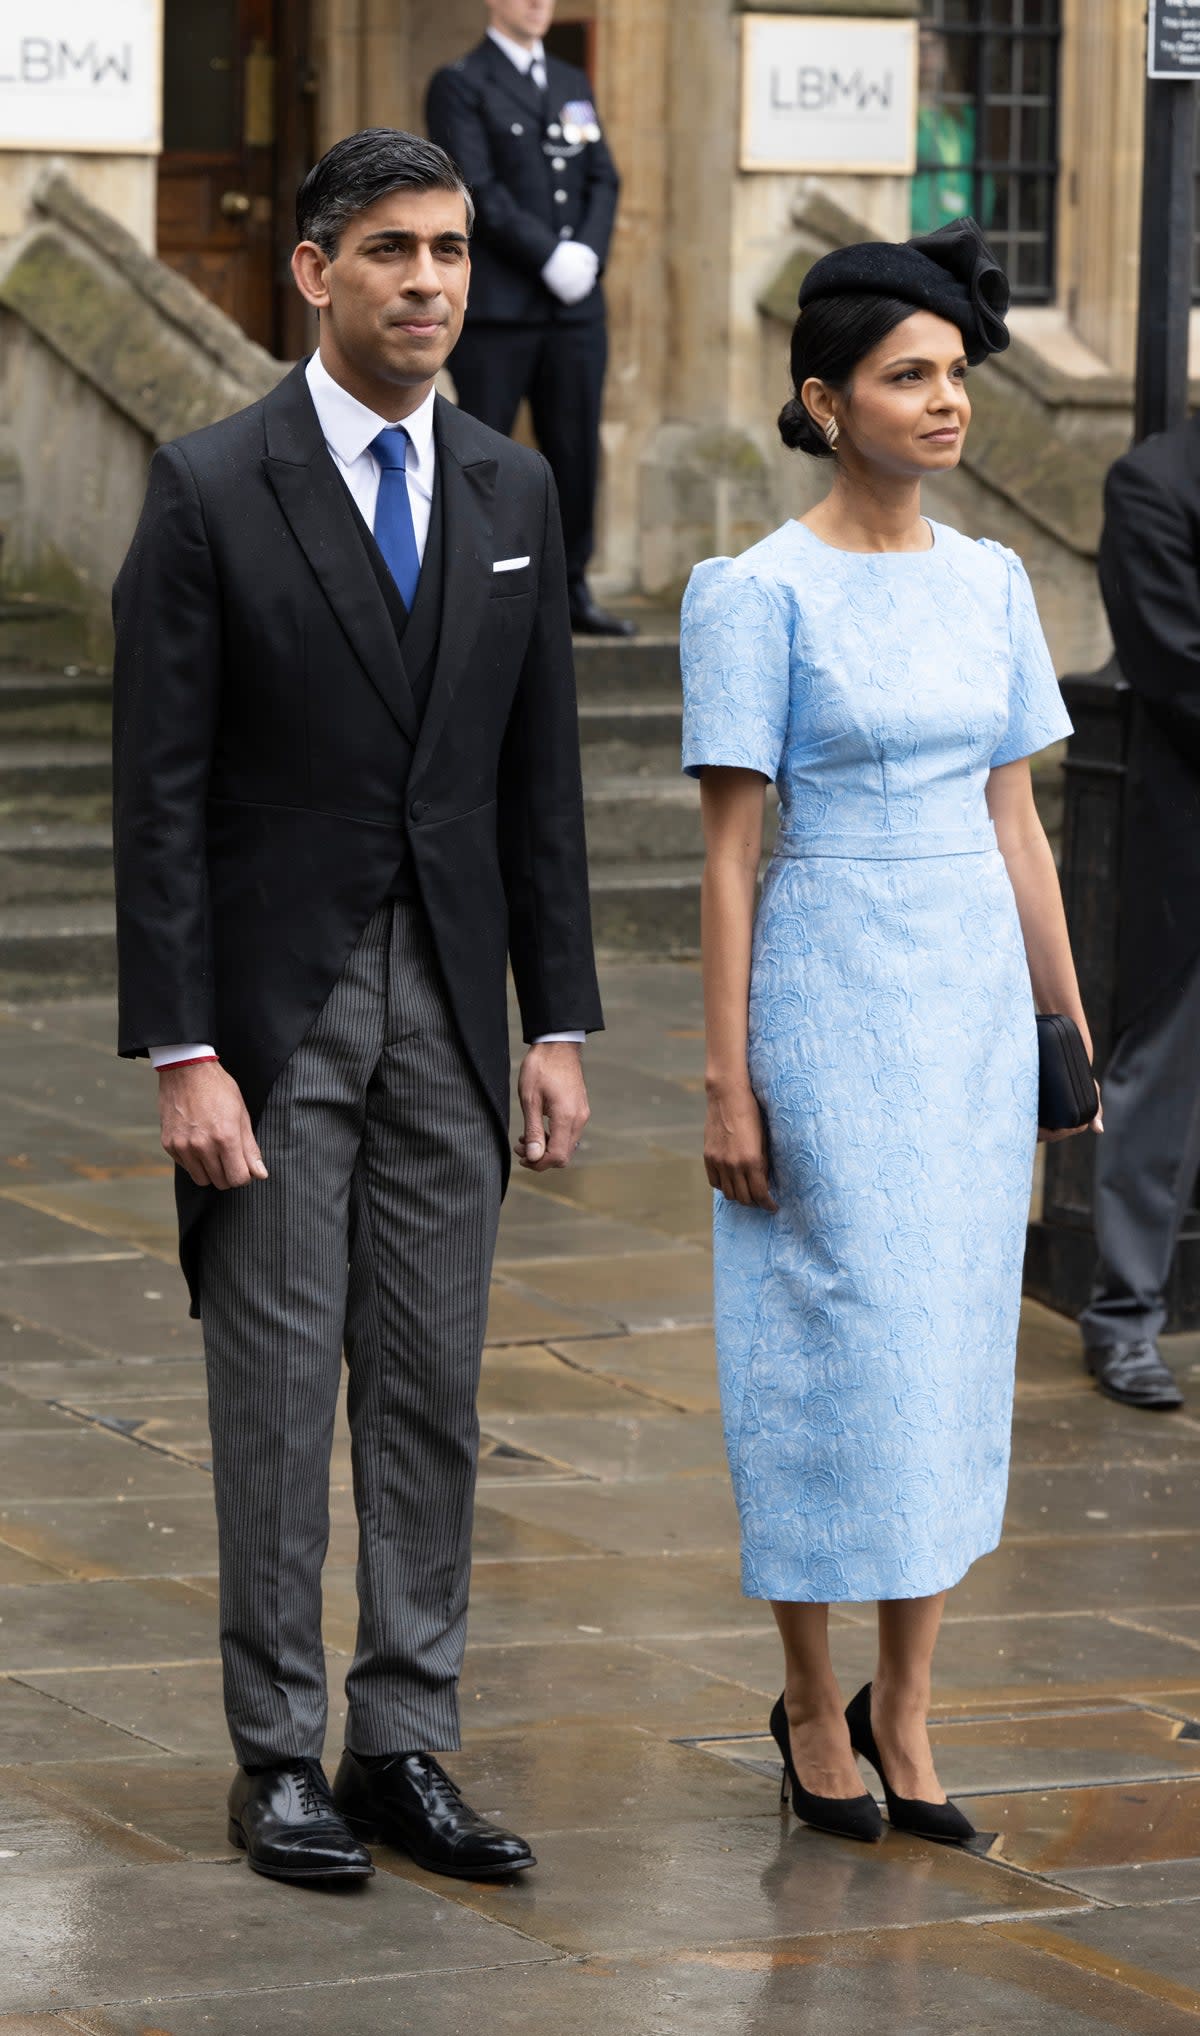 Prime minister Rishi Sunk and his wife Akshata Murthy attend the Coronation of King Charles III and Queen Camilla at Westminster Abbey on May 6, 2023 (Getty Images)